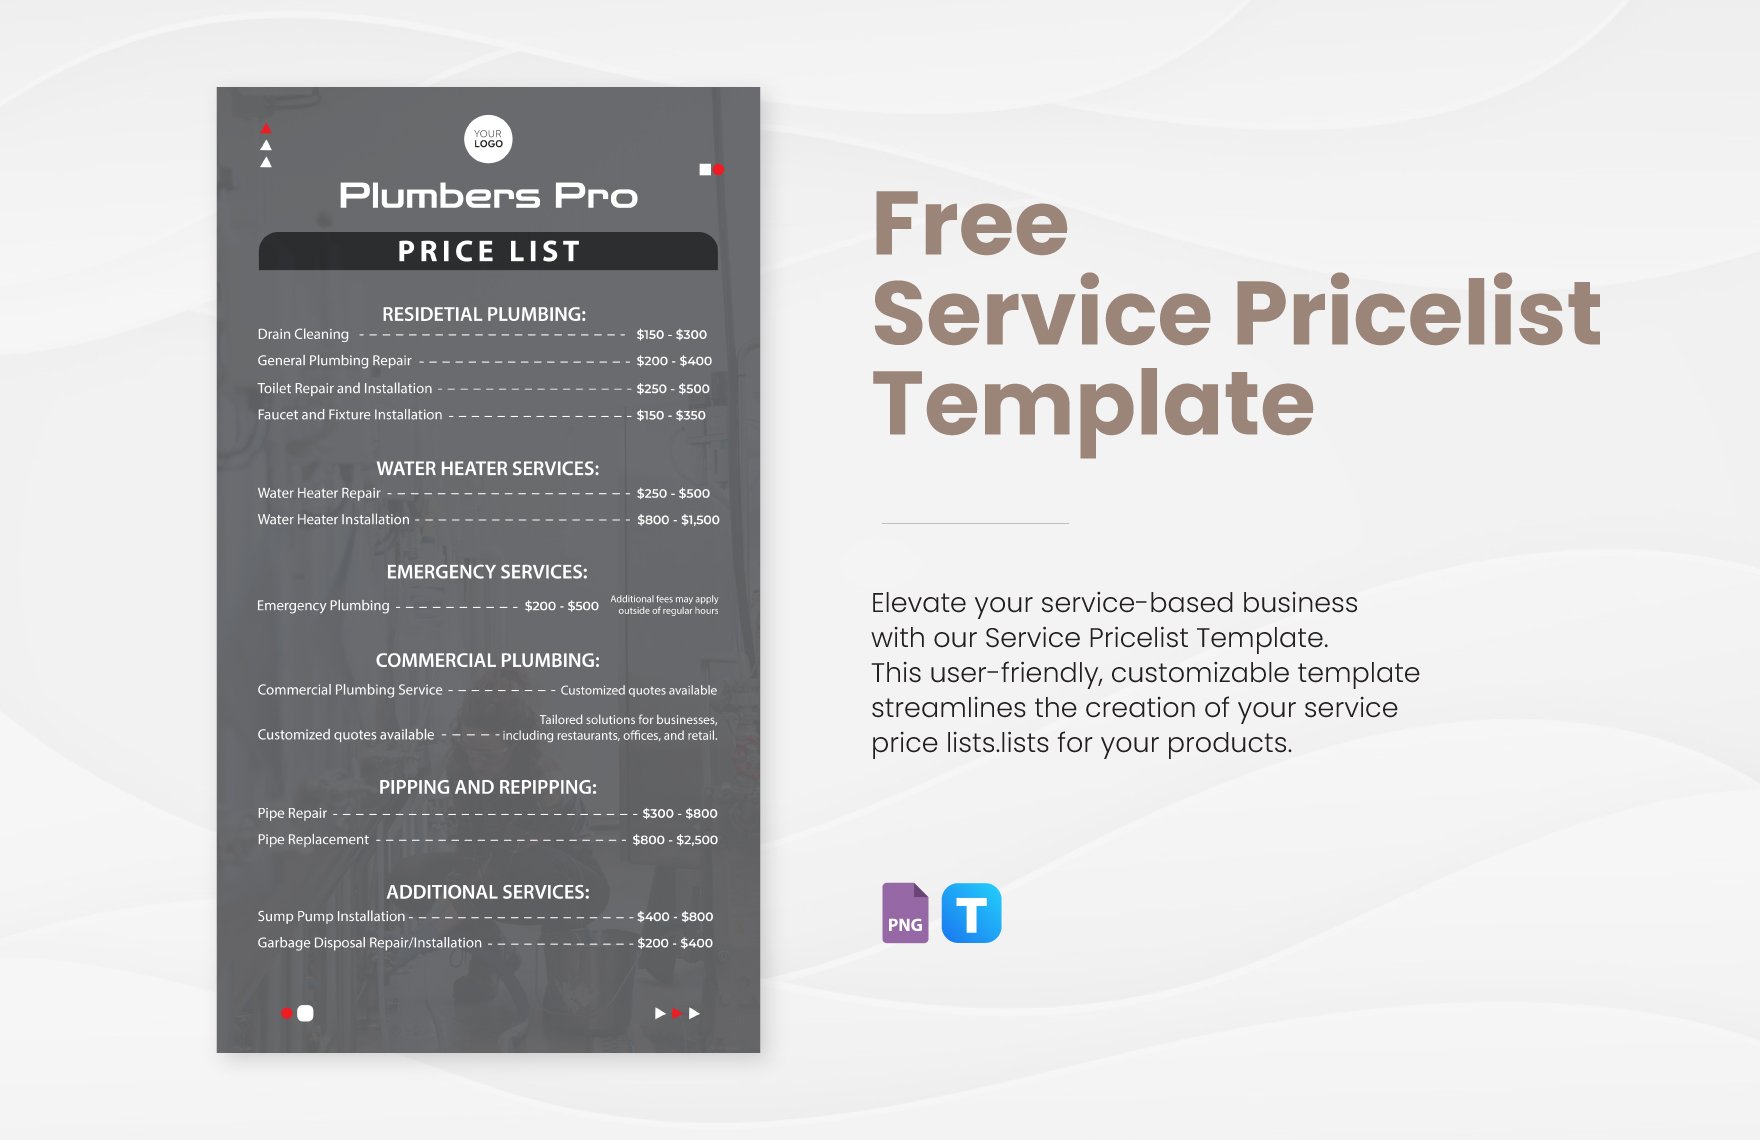 Service Pricelist Template in PNG